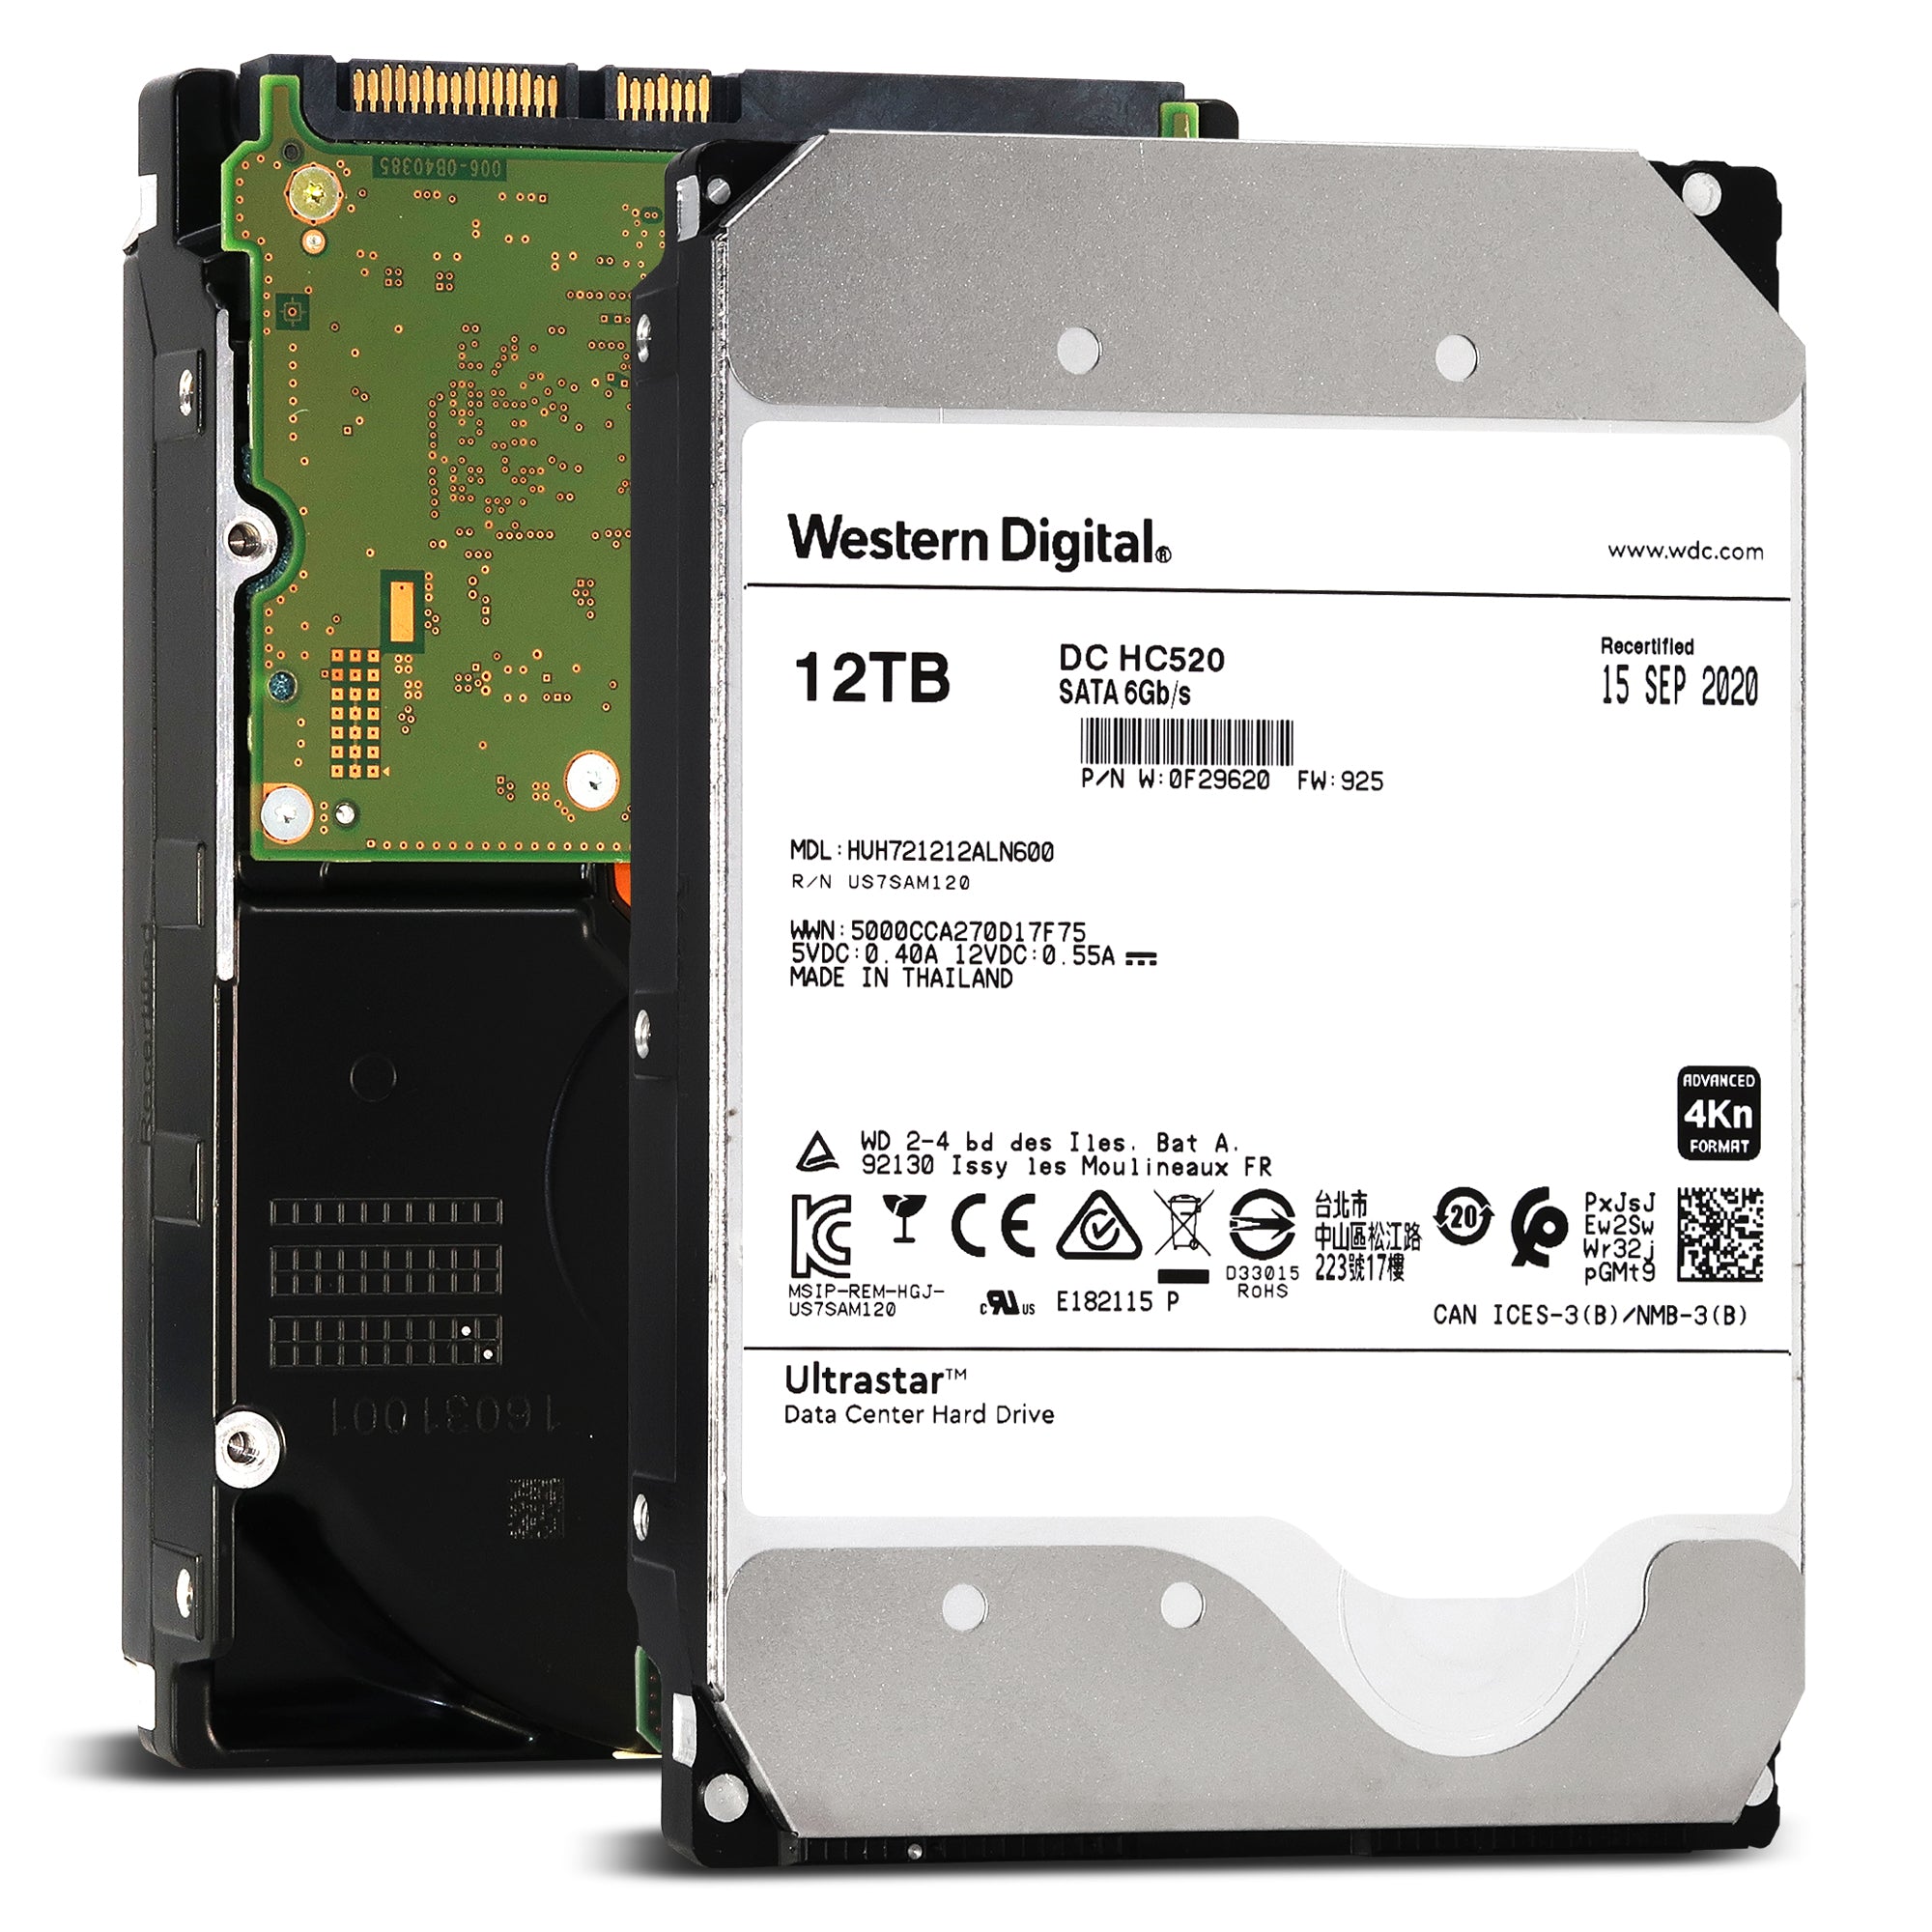 WD Ultrastar HC520 HUH721212ALN600 0F29620 12TB 7.2K RPM SATA 6Gb/s 4Kn 256MB 3.5" ISE Power Disable Pin Manufacturer Recertified HDD